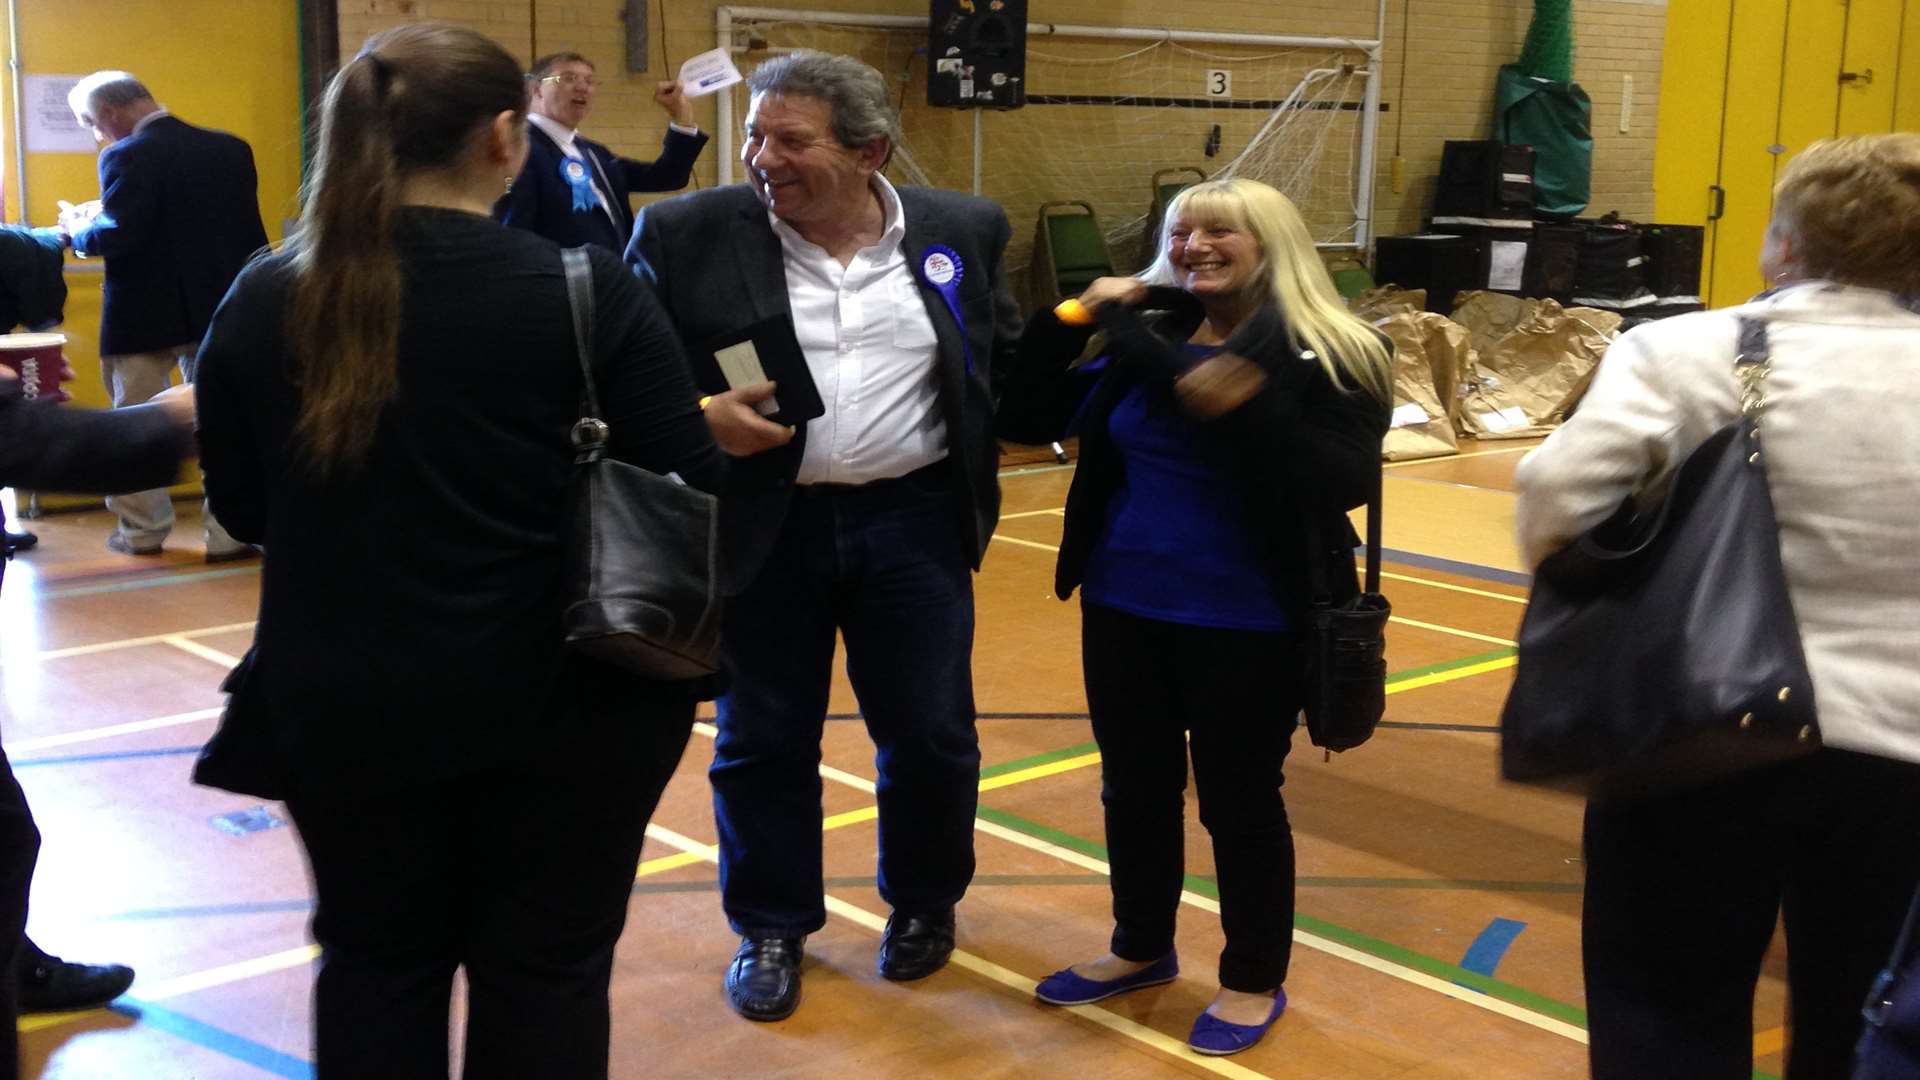 Newly elected MP Gordon Henderson came to view the count